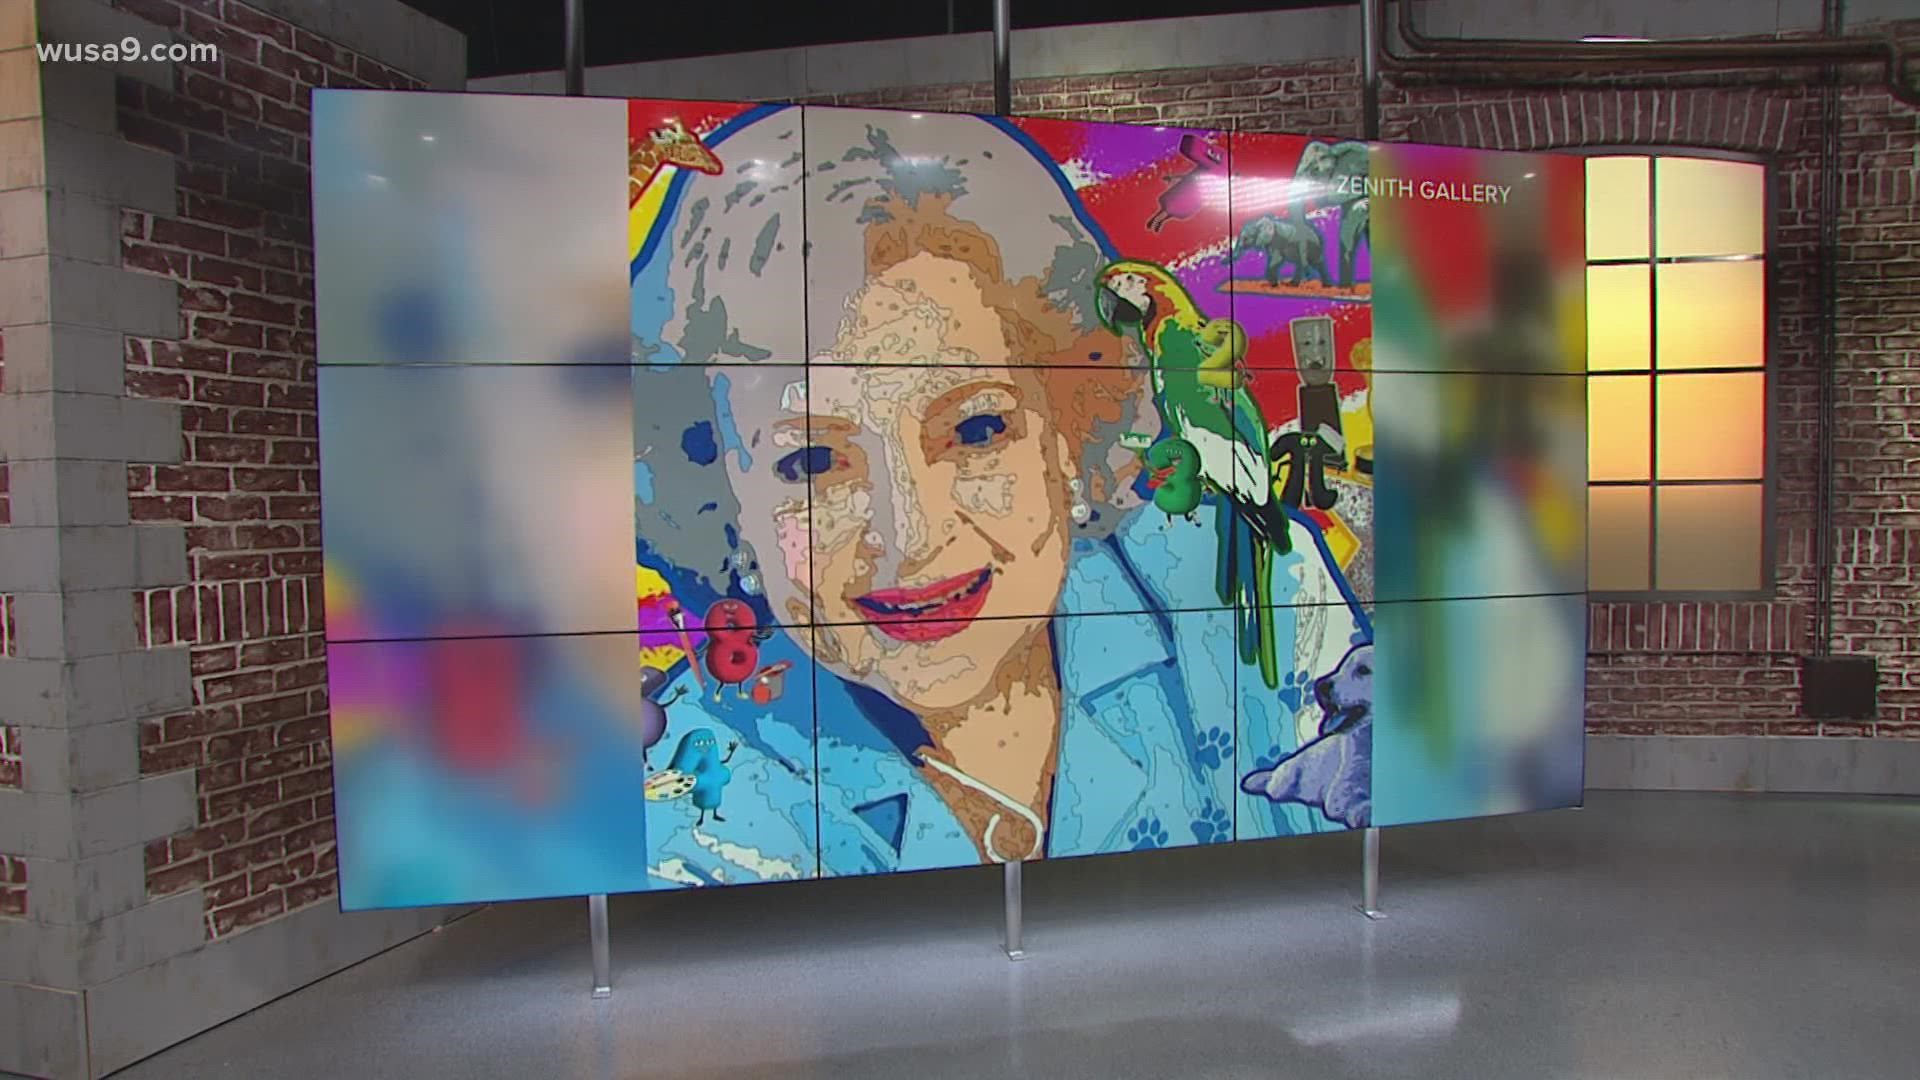 More than a dozen local and national artists pay tribute to Betty White at the Zenith Gallery